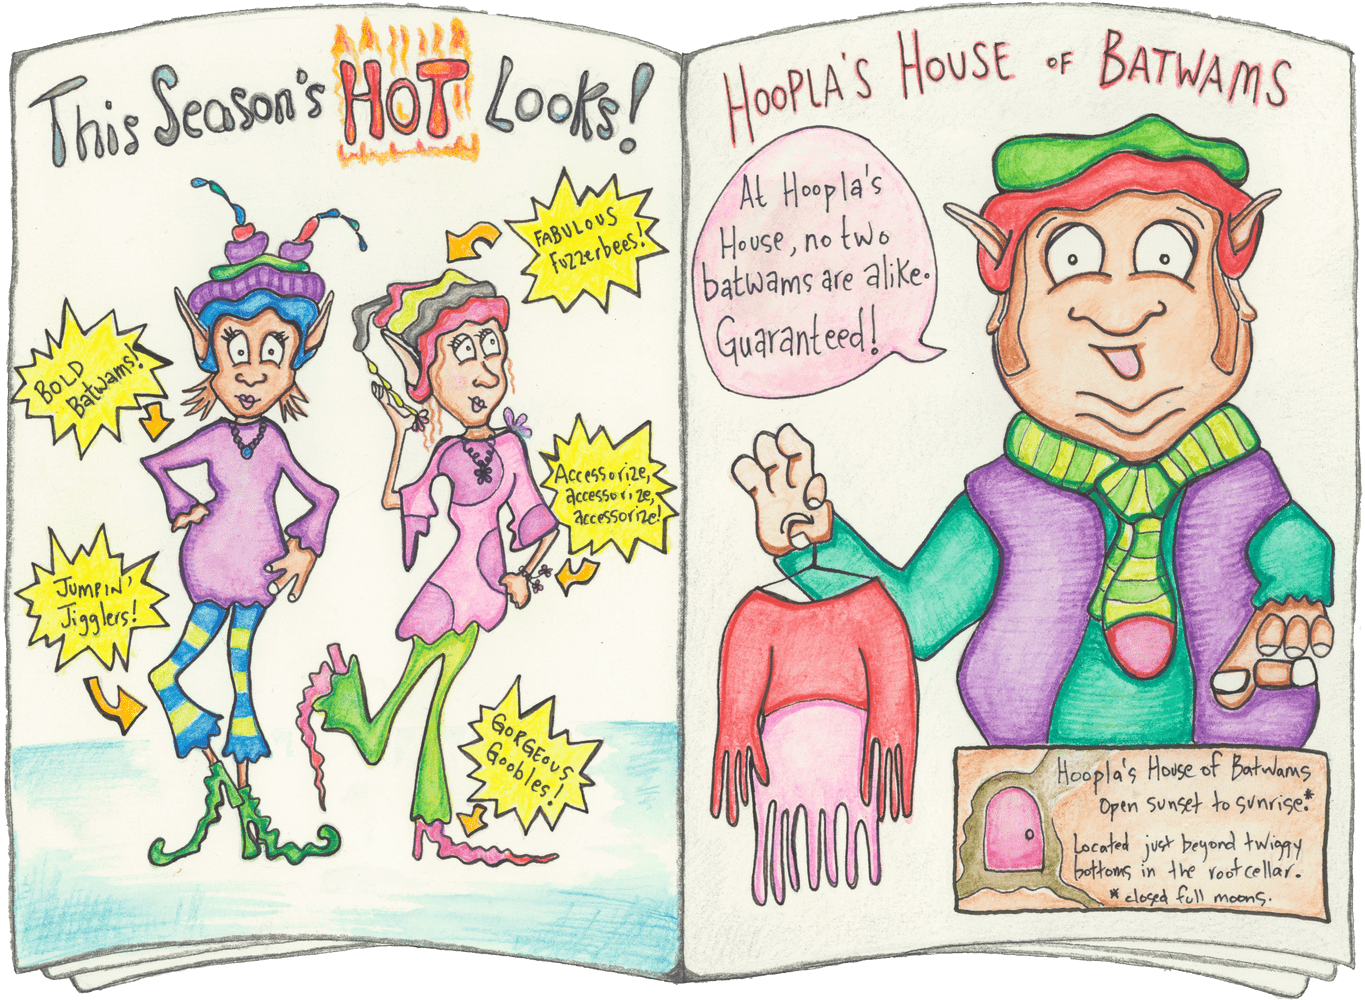 A magazine showing the hot fashions of the season from Hoopla's House of Batwams